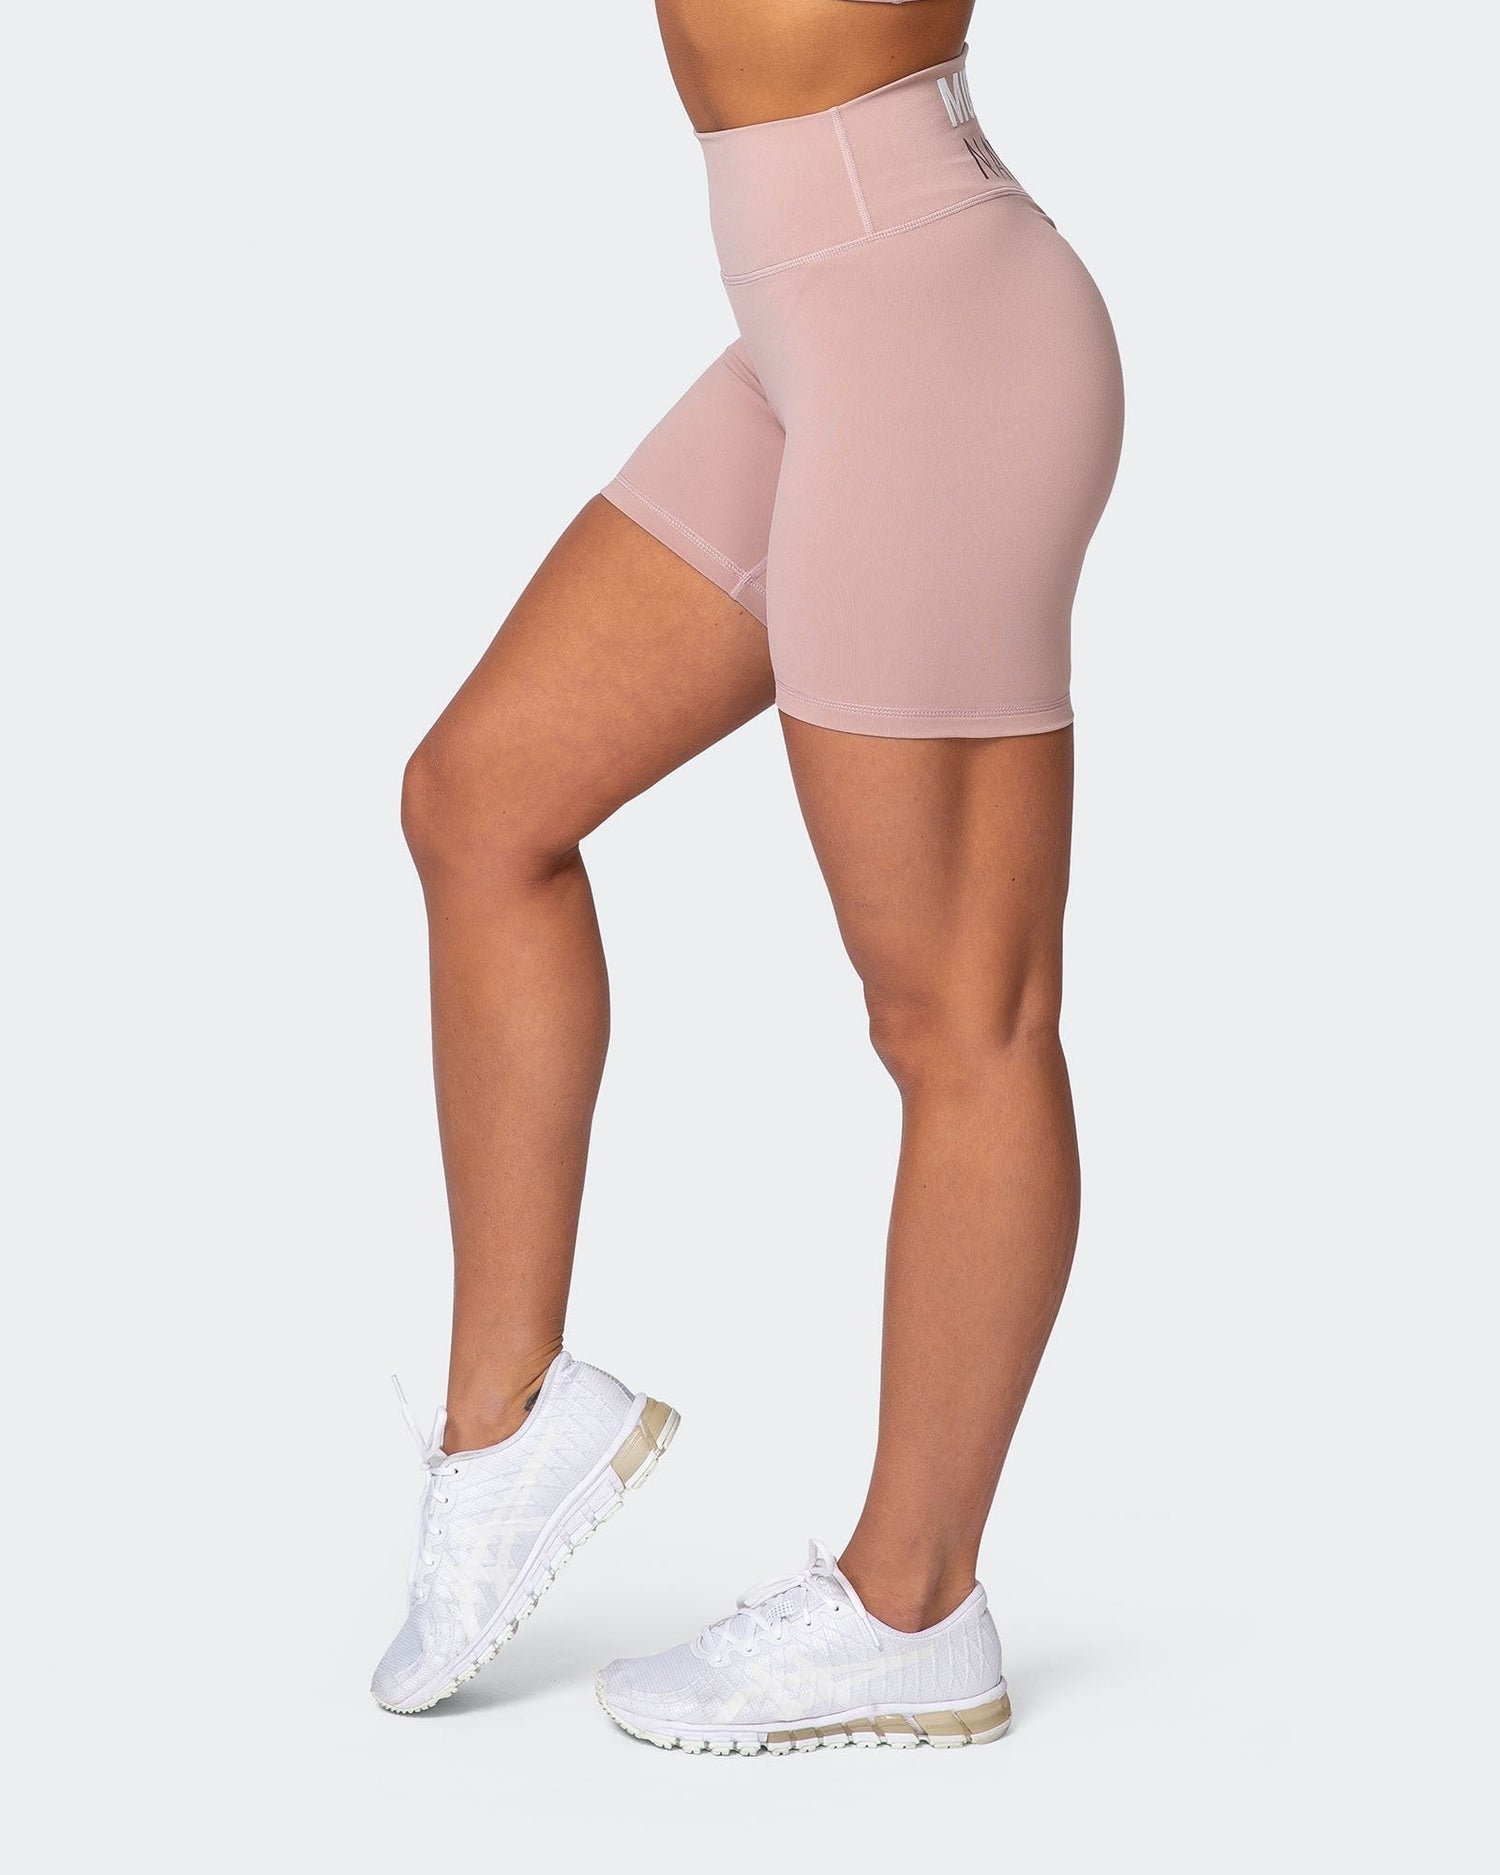 Prize Fighter Bike Shorts - Fawn W/ White & Wine